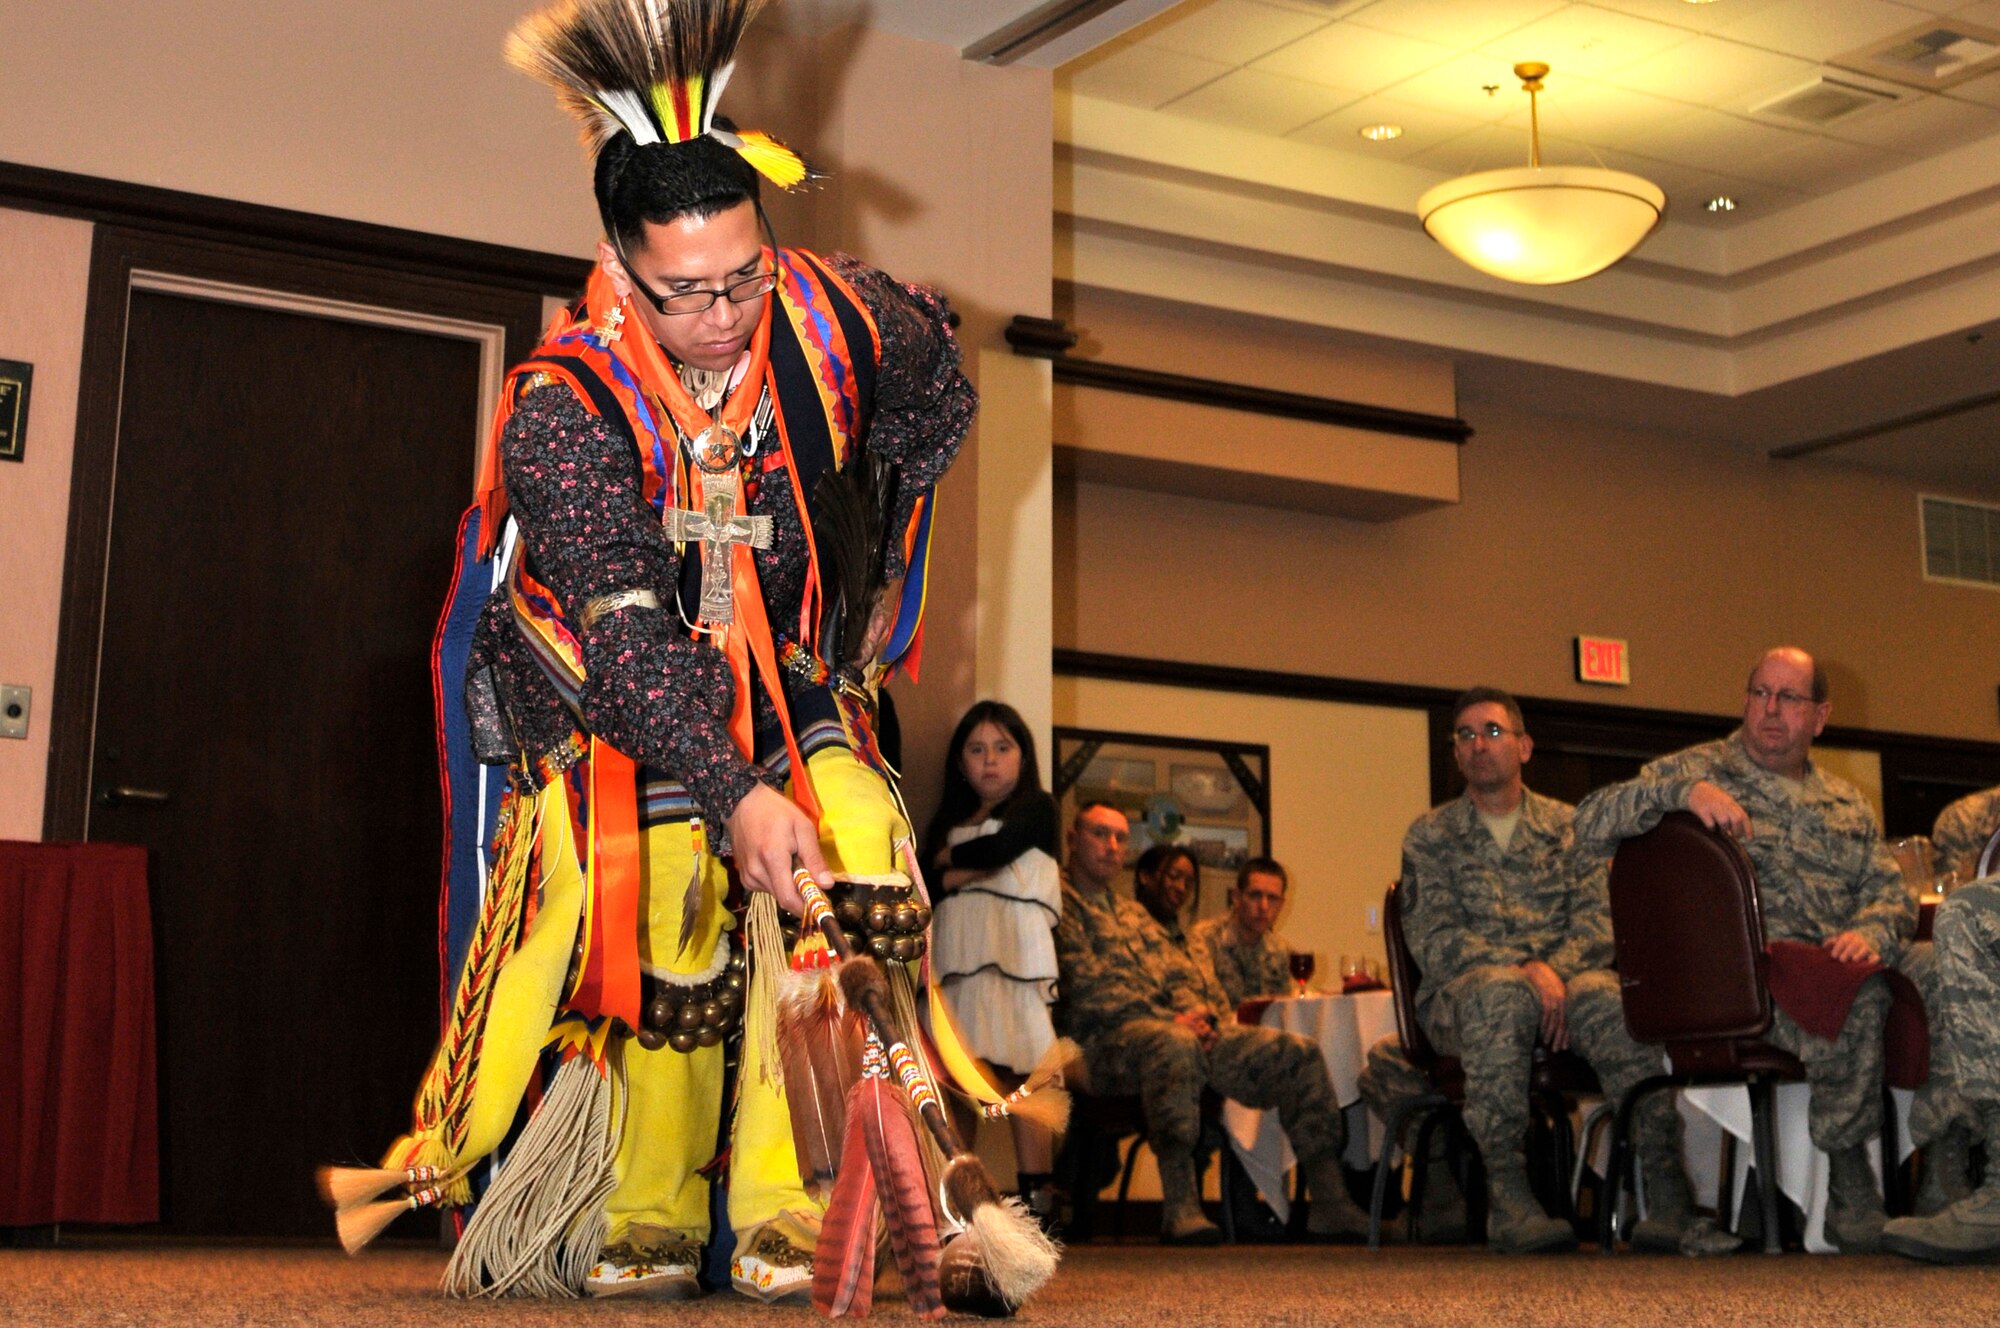 Tech. Sgt. Thundercloud Hirajeta performs a southern plains war dance during the Native American Heritage Month luncheon at the Recce Point Club Beale Air Force Base, Calif. Nov 29, 2011.  Hirajeta gave a description about the style of dance he was performing as well as the symbolic nature of his regalia. (U.S. Air Force photo by Staff Sgt. Jeremy McGuffin/Released)